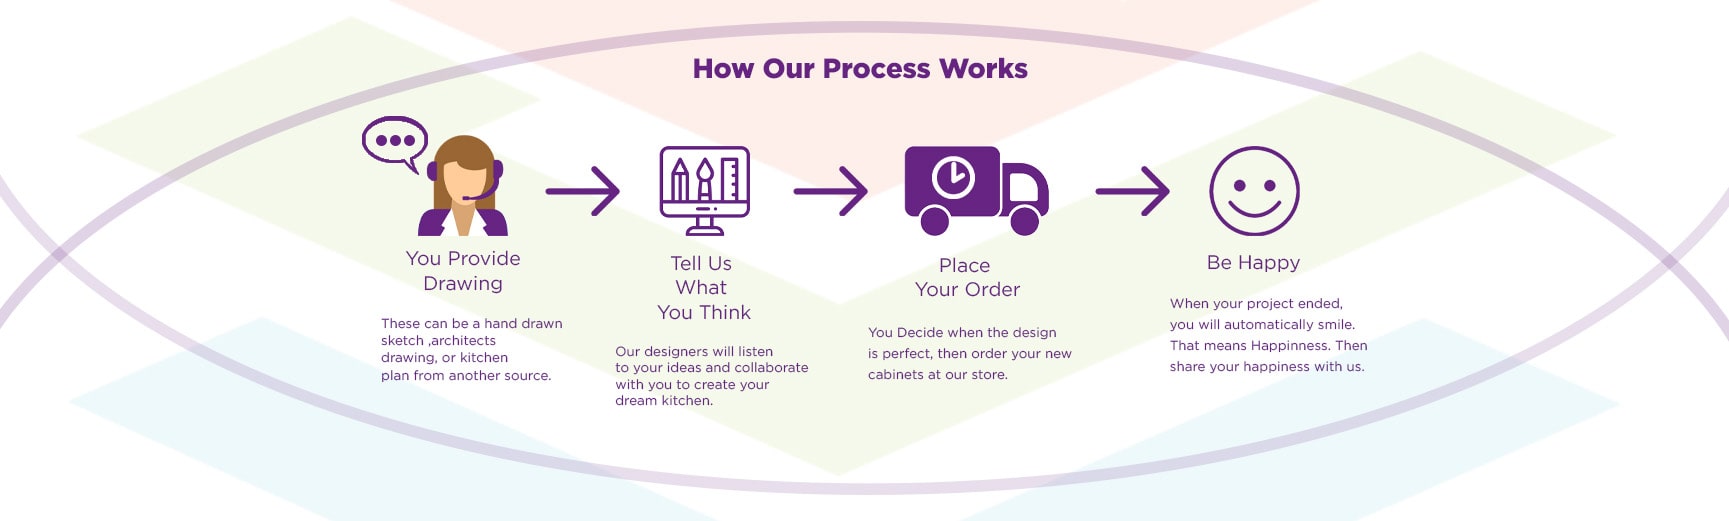 how-our-process-works-web-slider-min